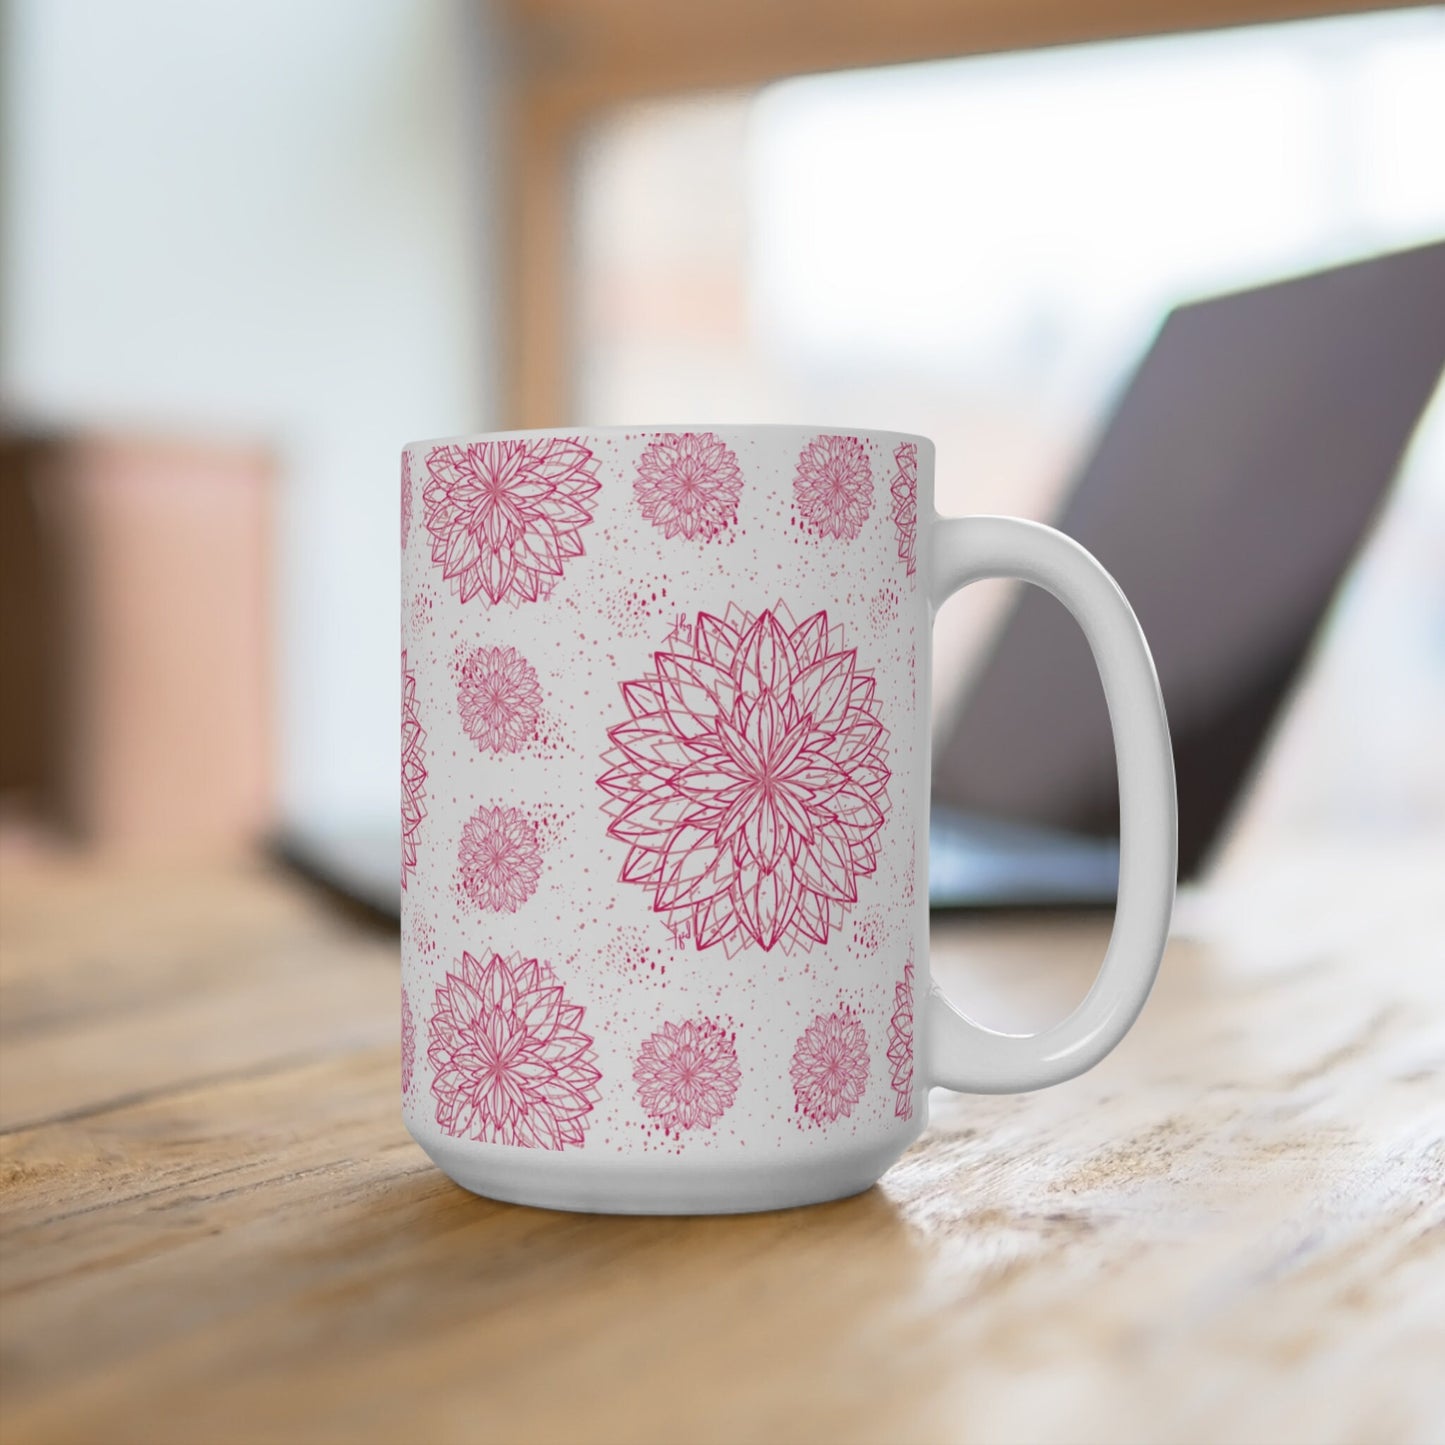 Mug 15oz - Designed byKath.com, all over floral print in pink and white